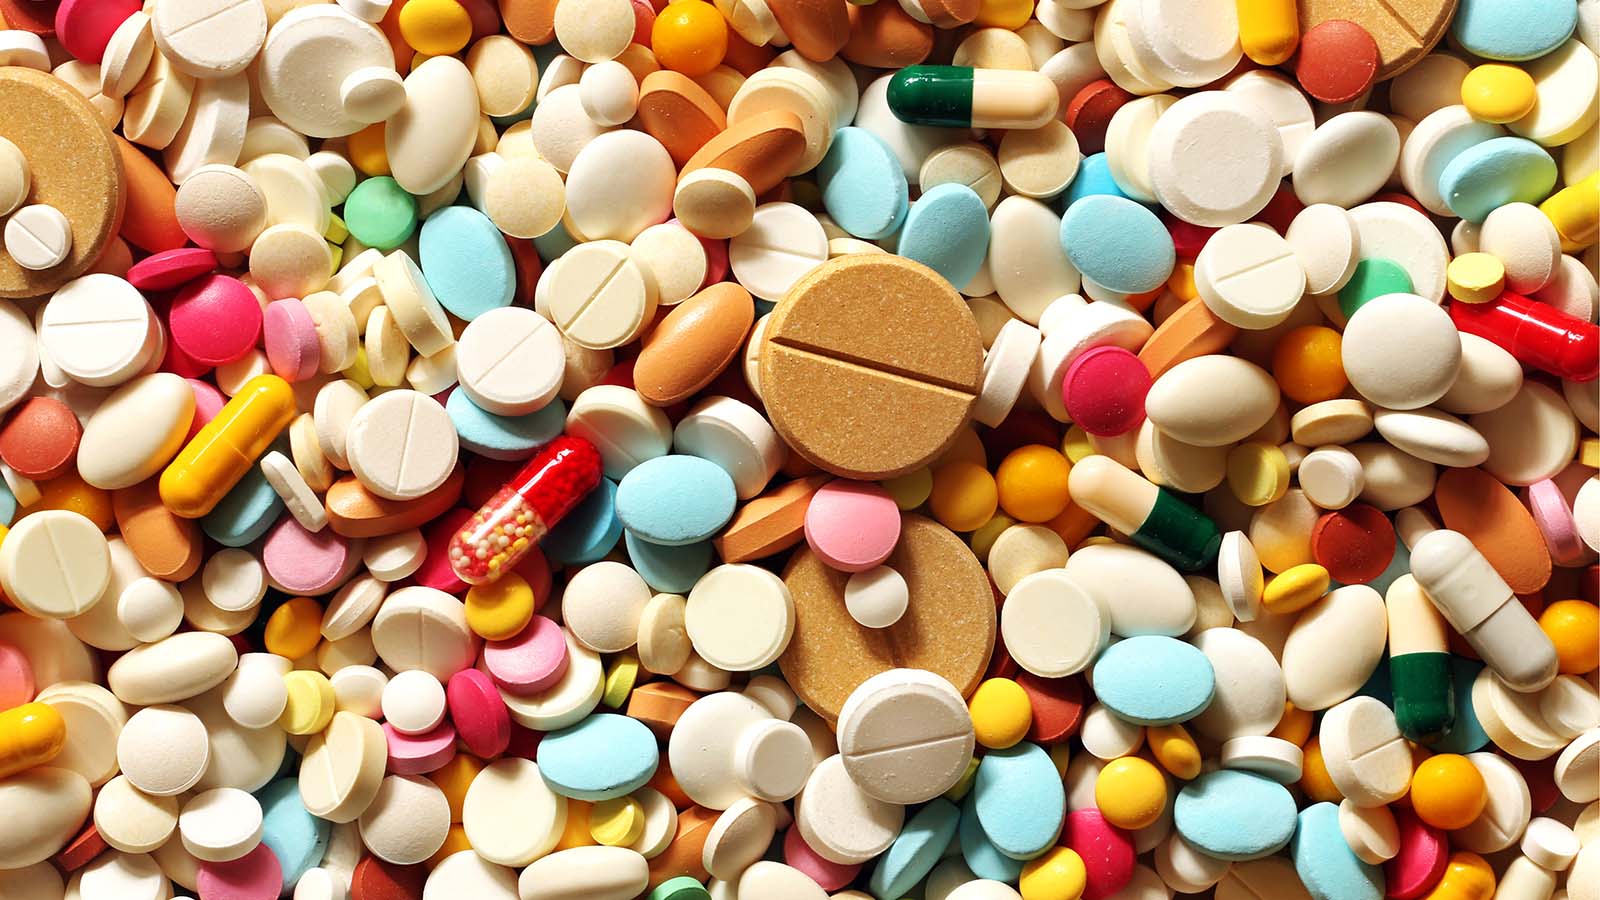 A pile of brightly colored pills in varying sizes and shapes representing TRVI stock.